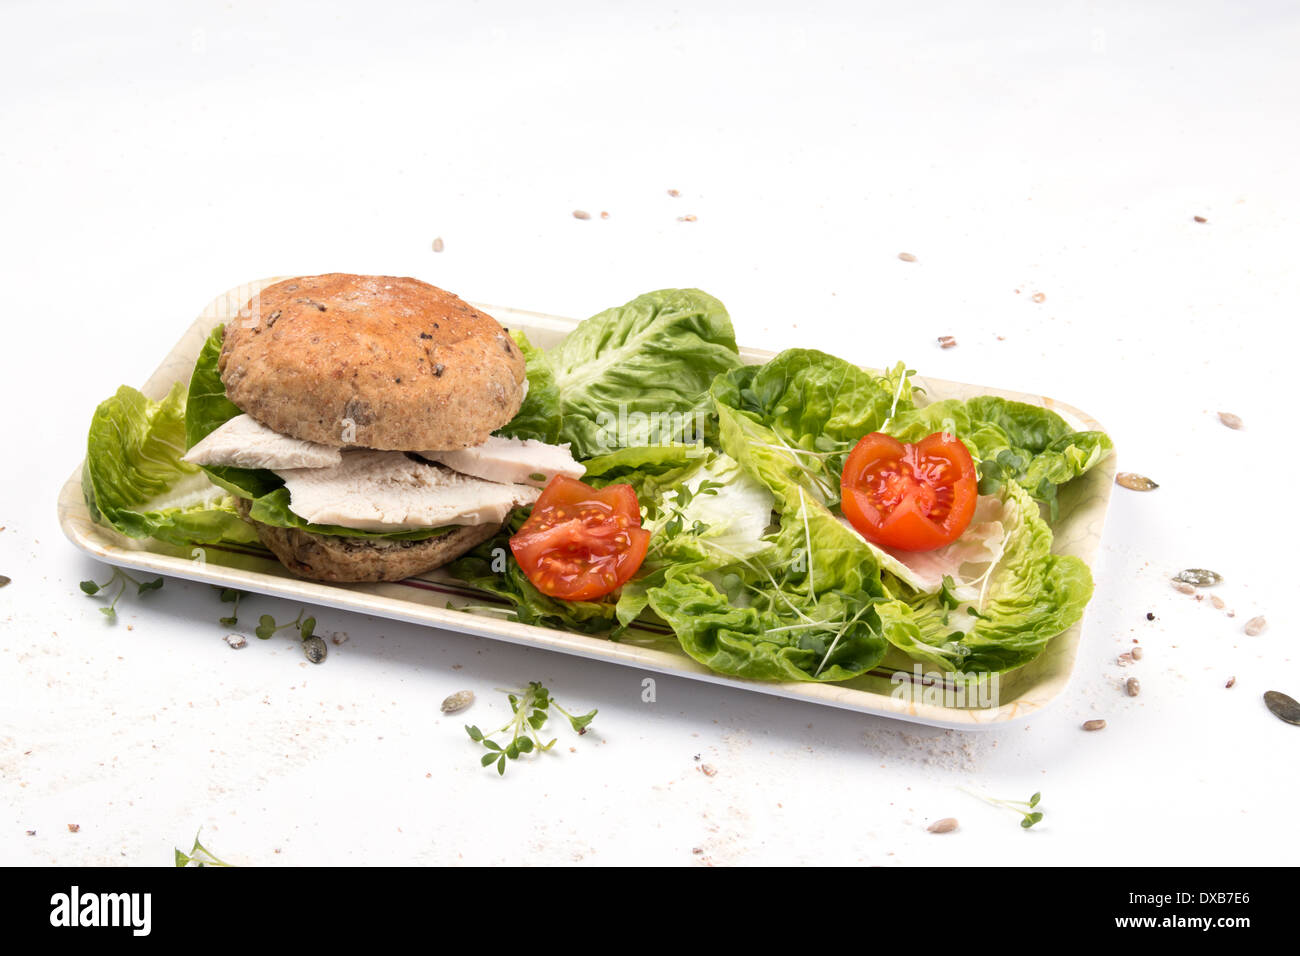 A chicken sandwich made with a seeded granary bread bun/cake/bap oblong white plate with tomato cress little Gem salad  (4of 5) Stock Photo